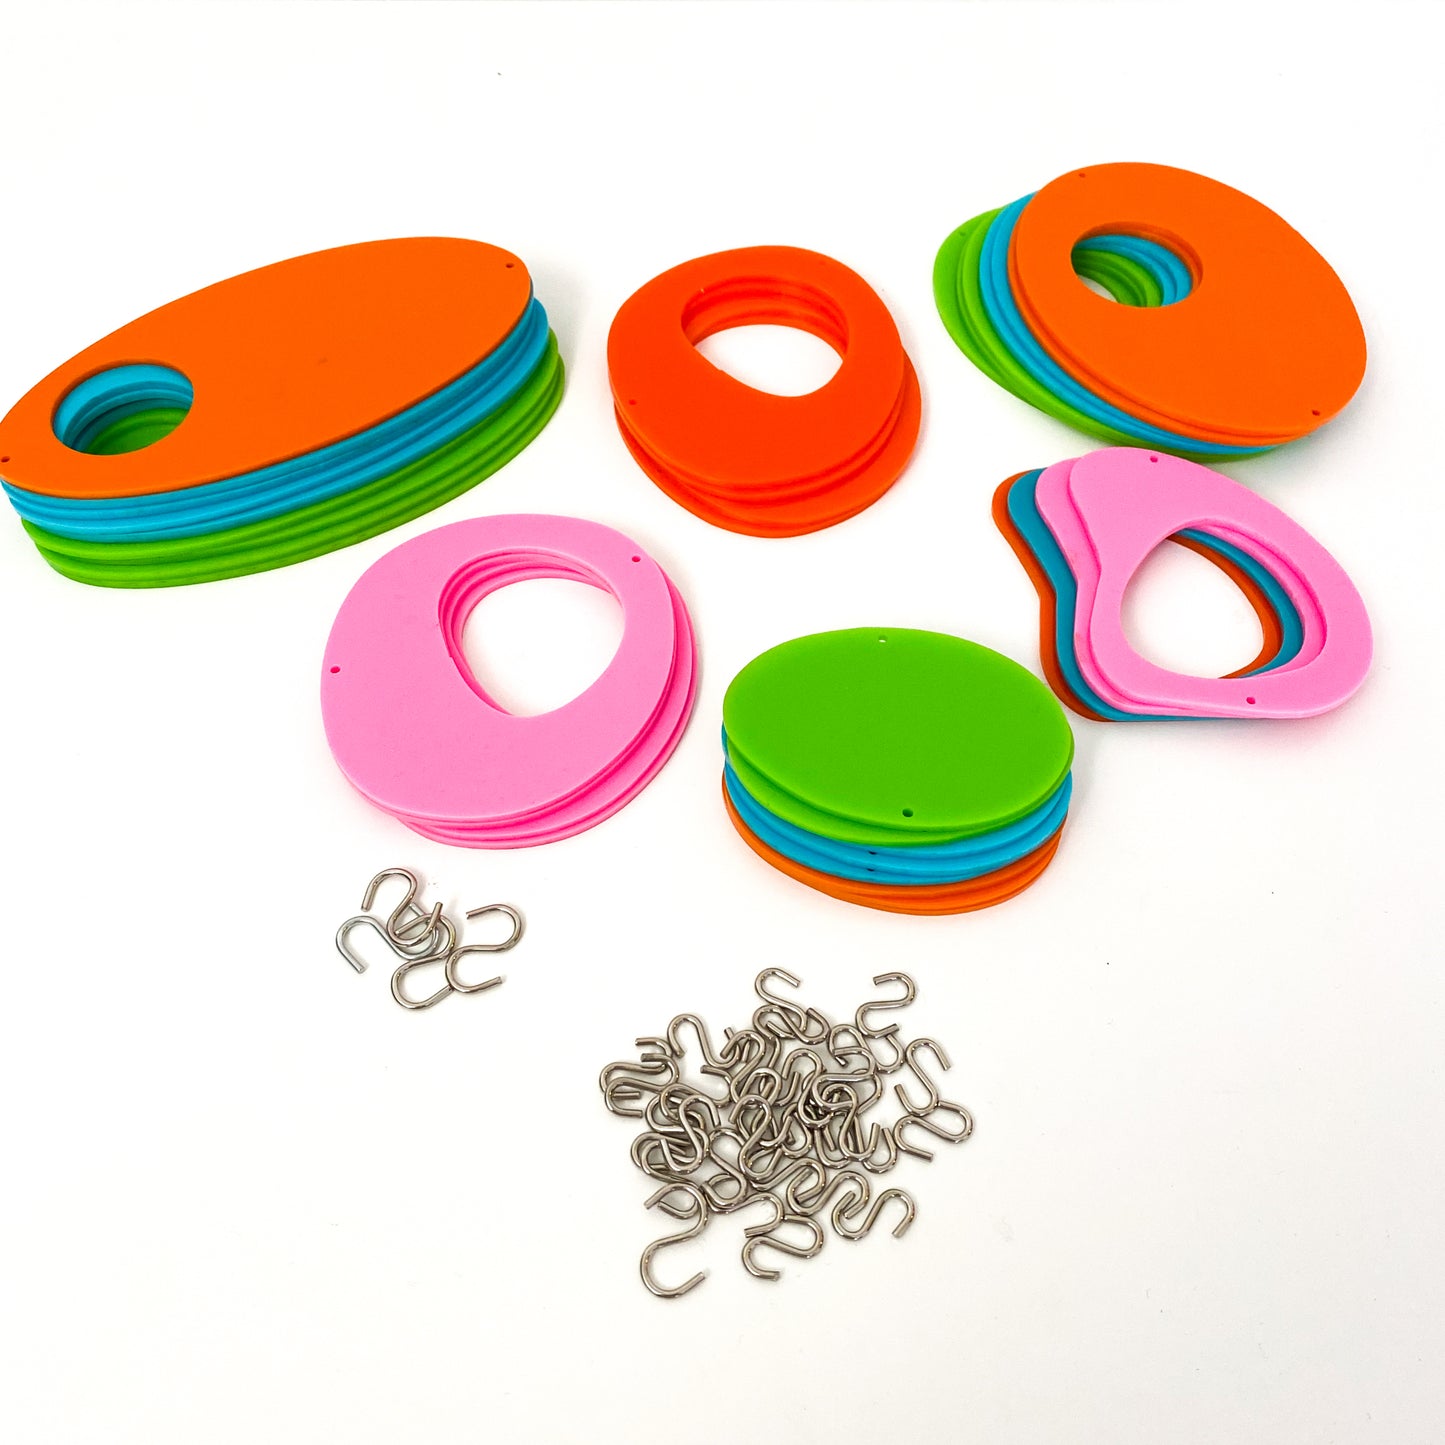 Parts for DIY cool retro kinetic art piece Kit  in orange, pink, lime, and  aqua for wall art, mobiles, or room dividers by AtomicMobiles.com